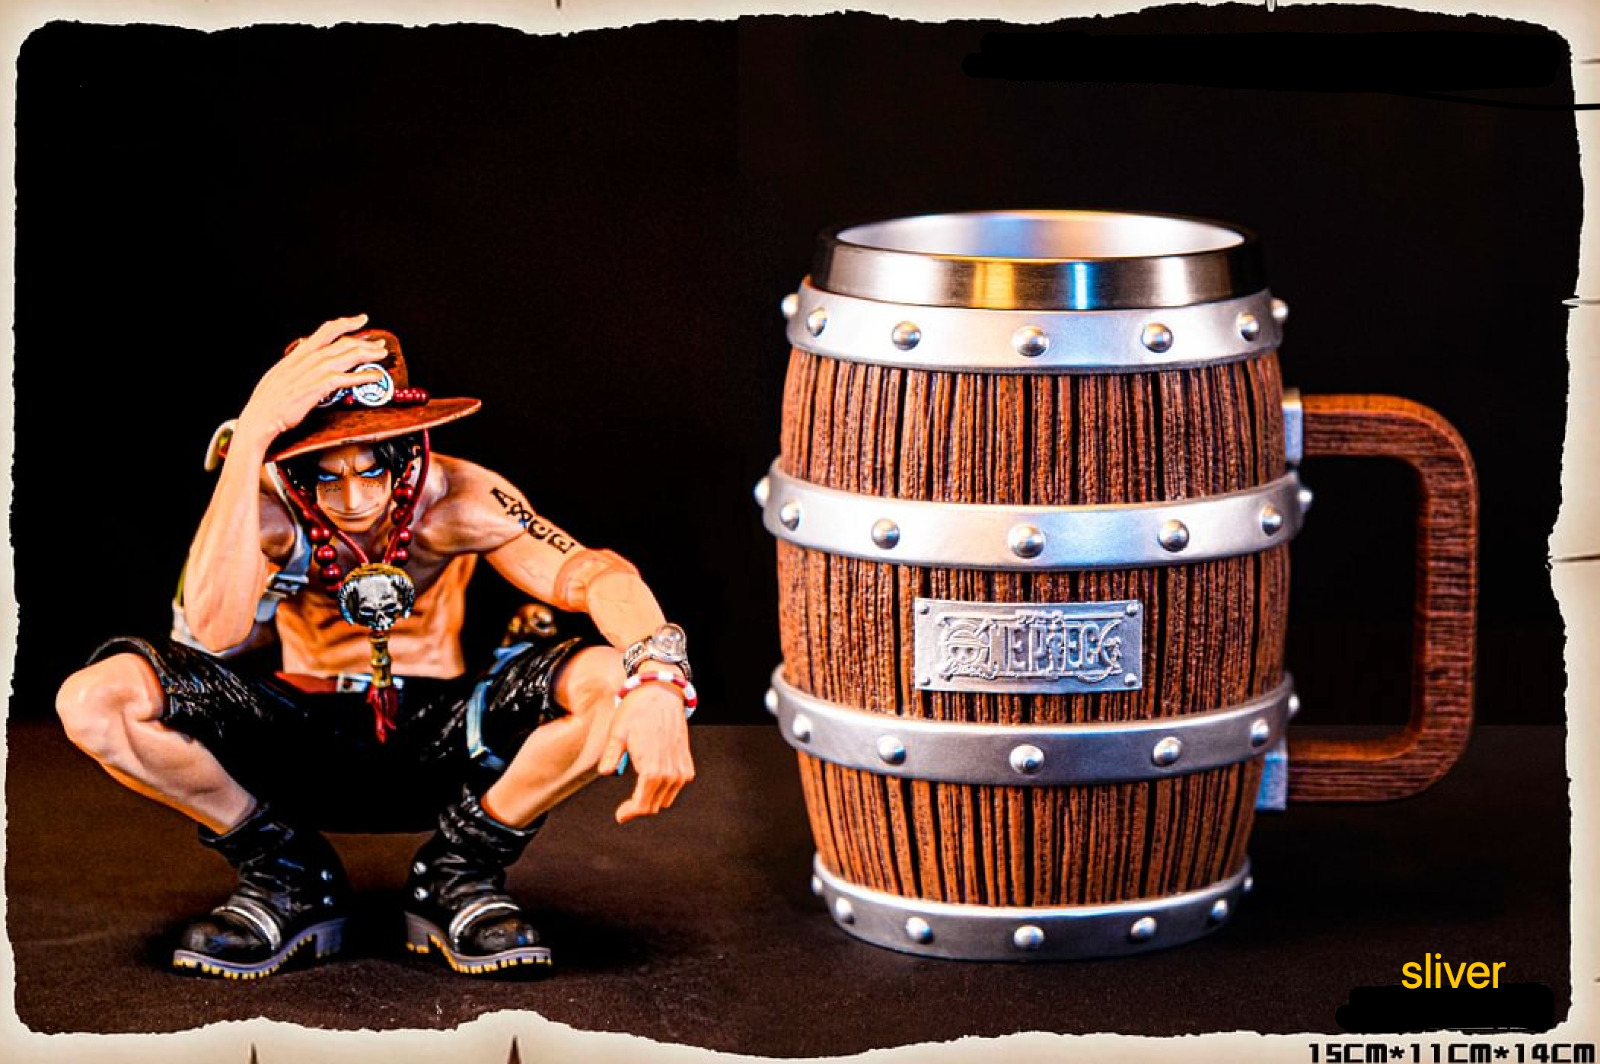 1/1 Scale ONE PIECE Luffy Zoro Beer Barrel Cup Resin Statue Stainless Steel Mug